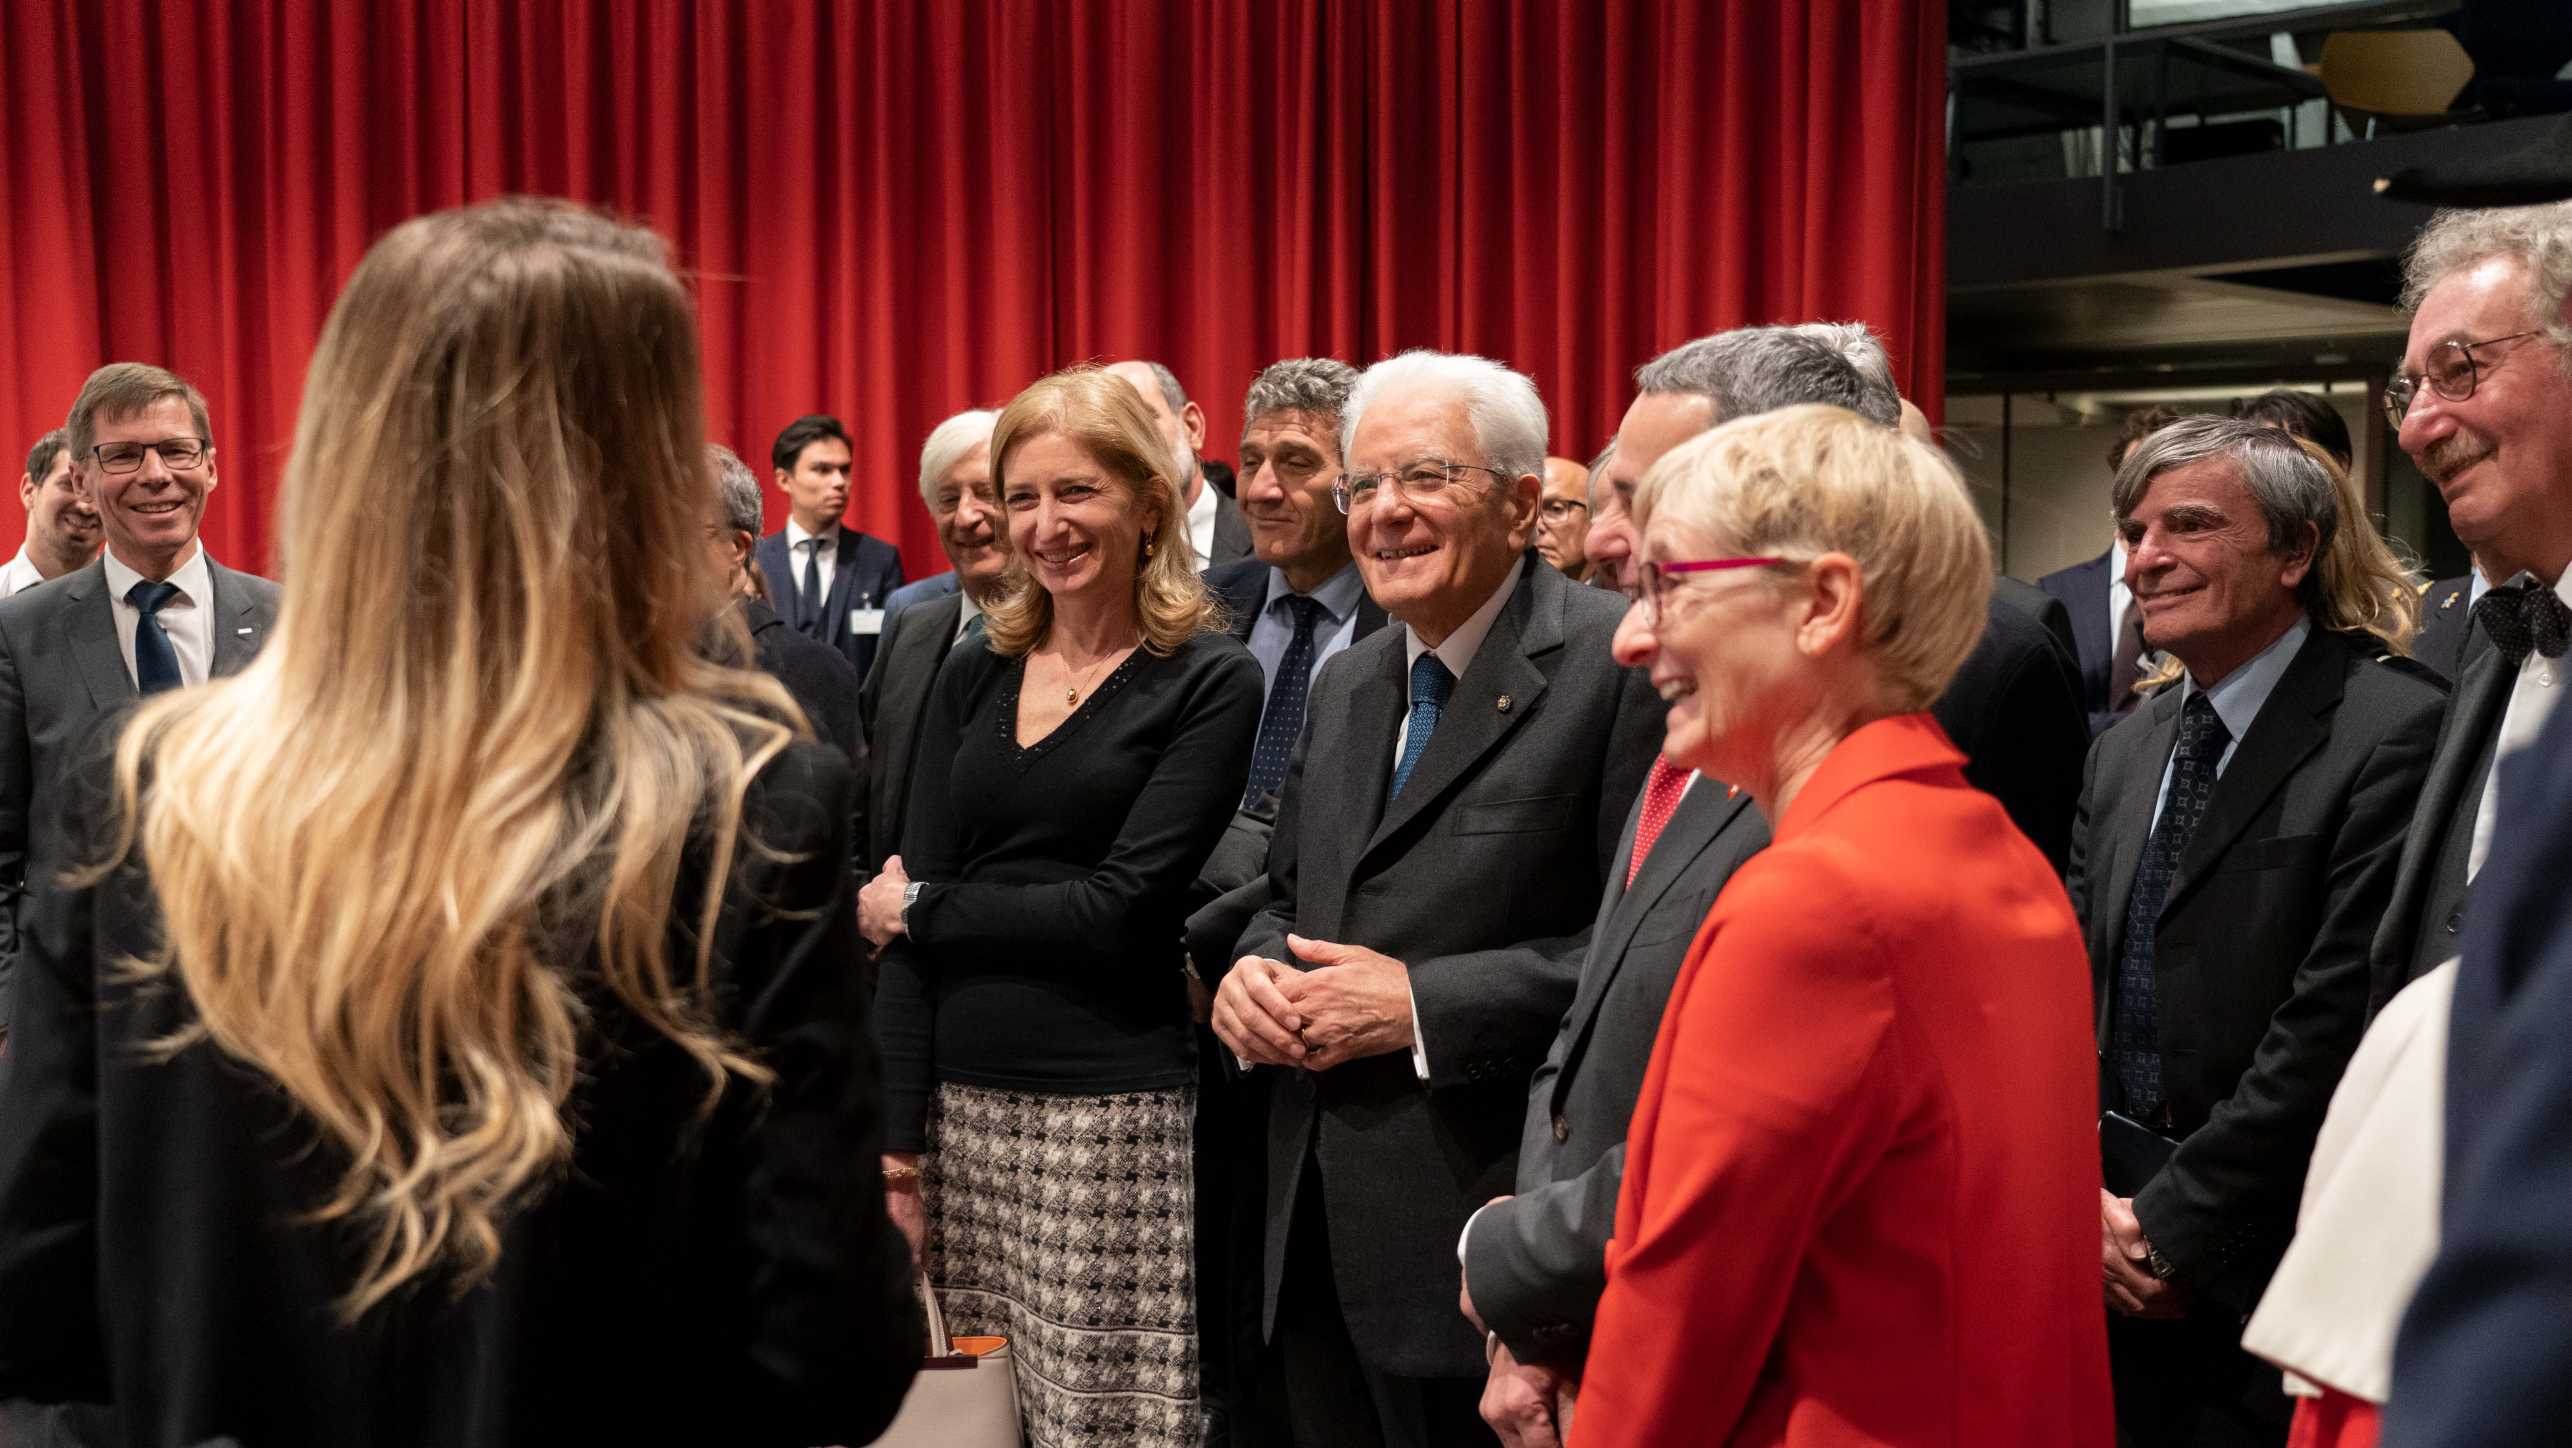 Laura and Sergio Mattarella in the middle of the picture, right to the Italien President is Ignazio Cassis.